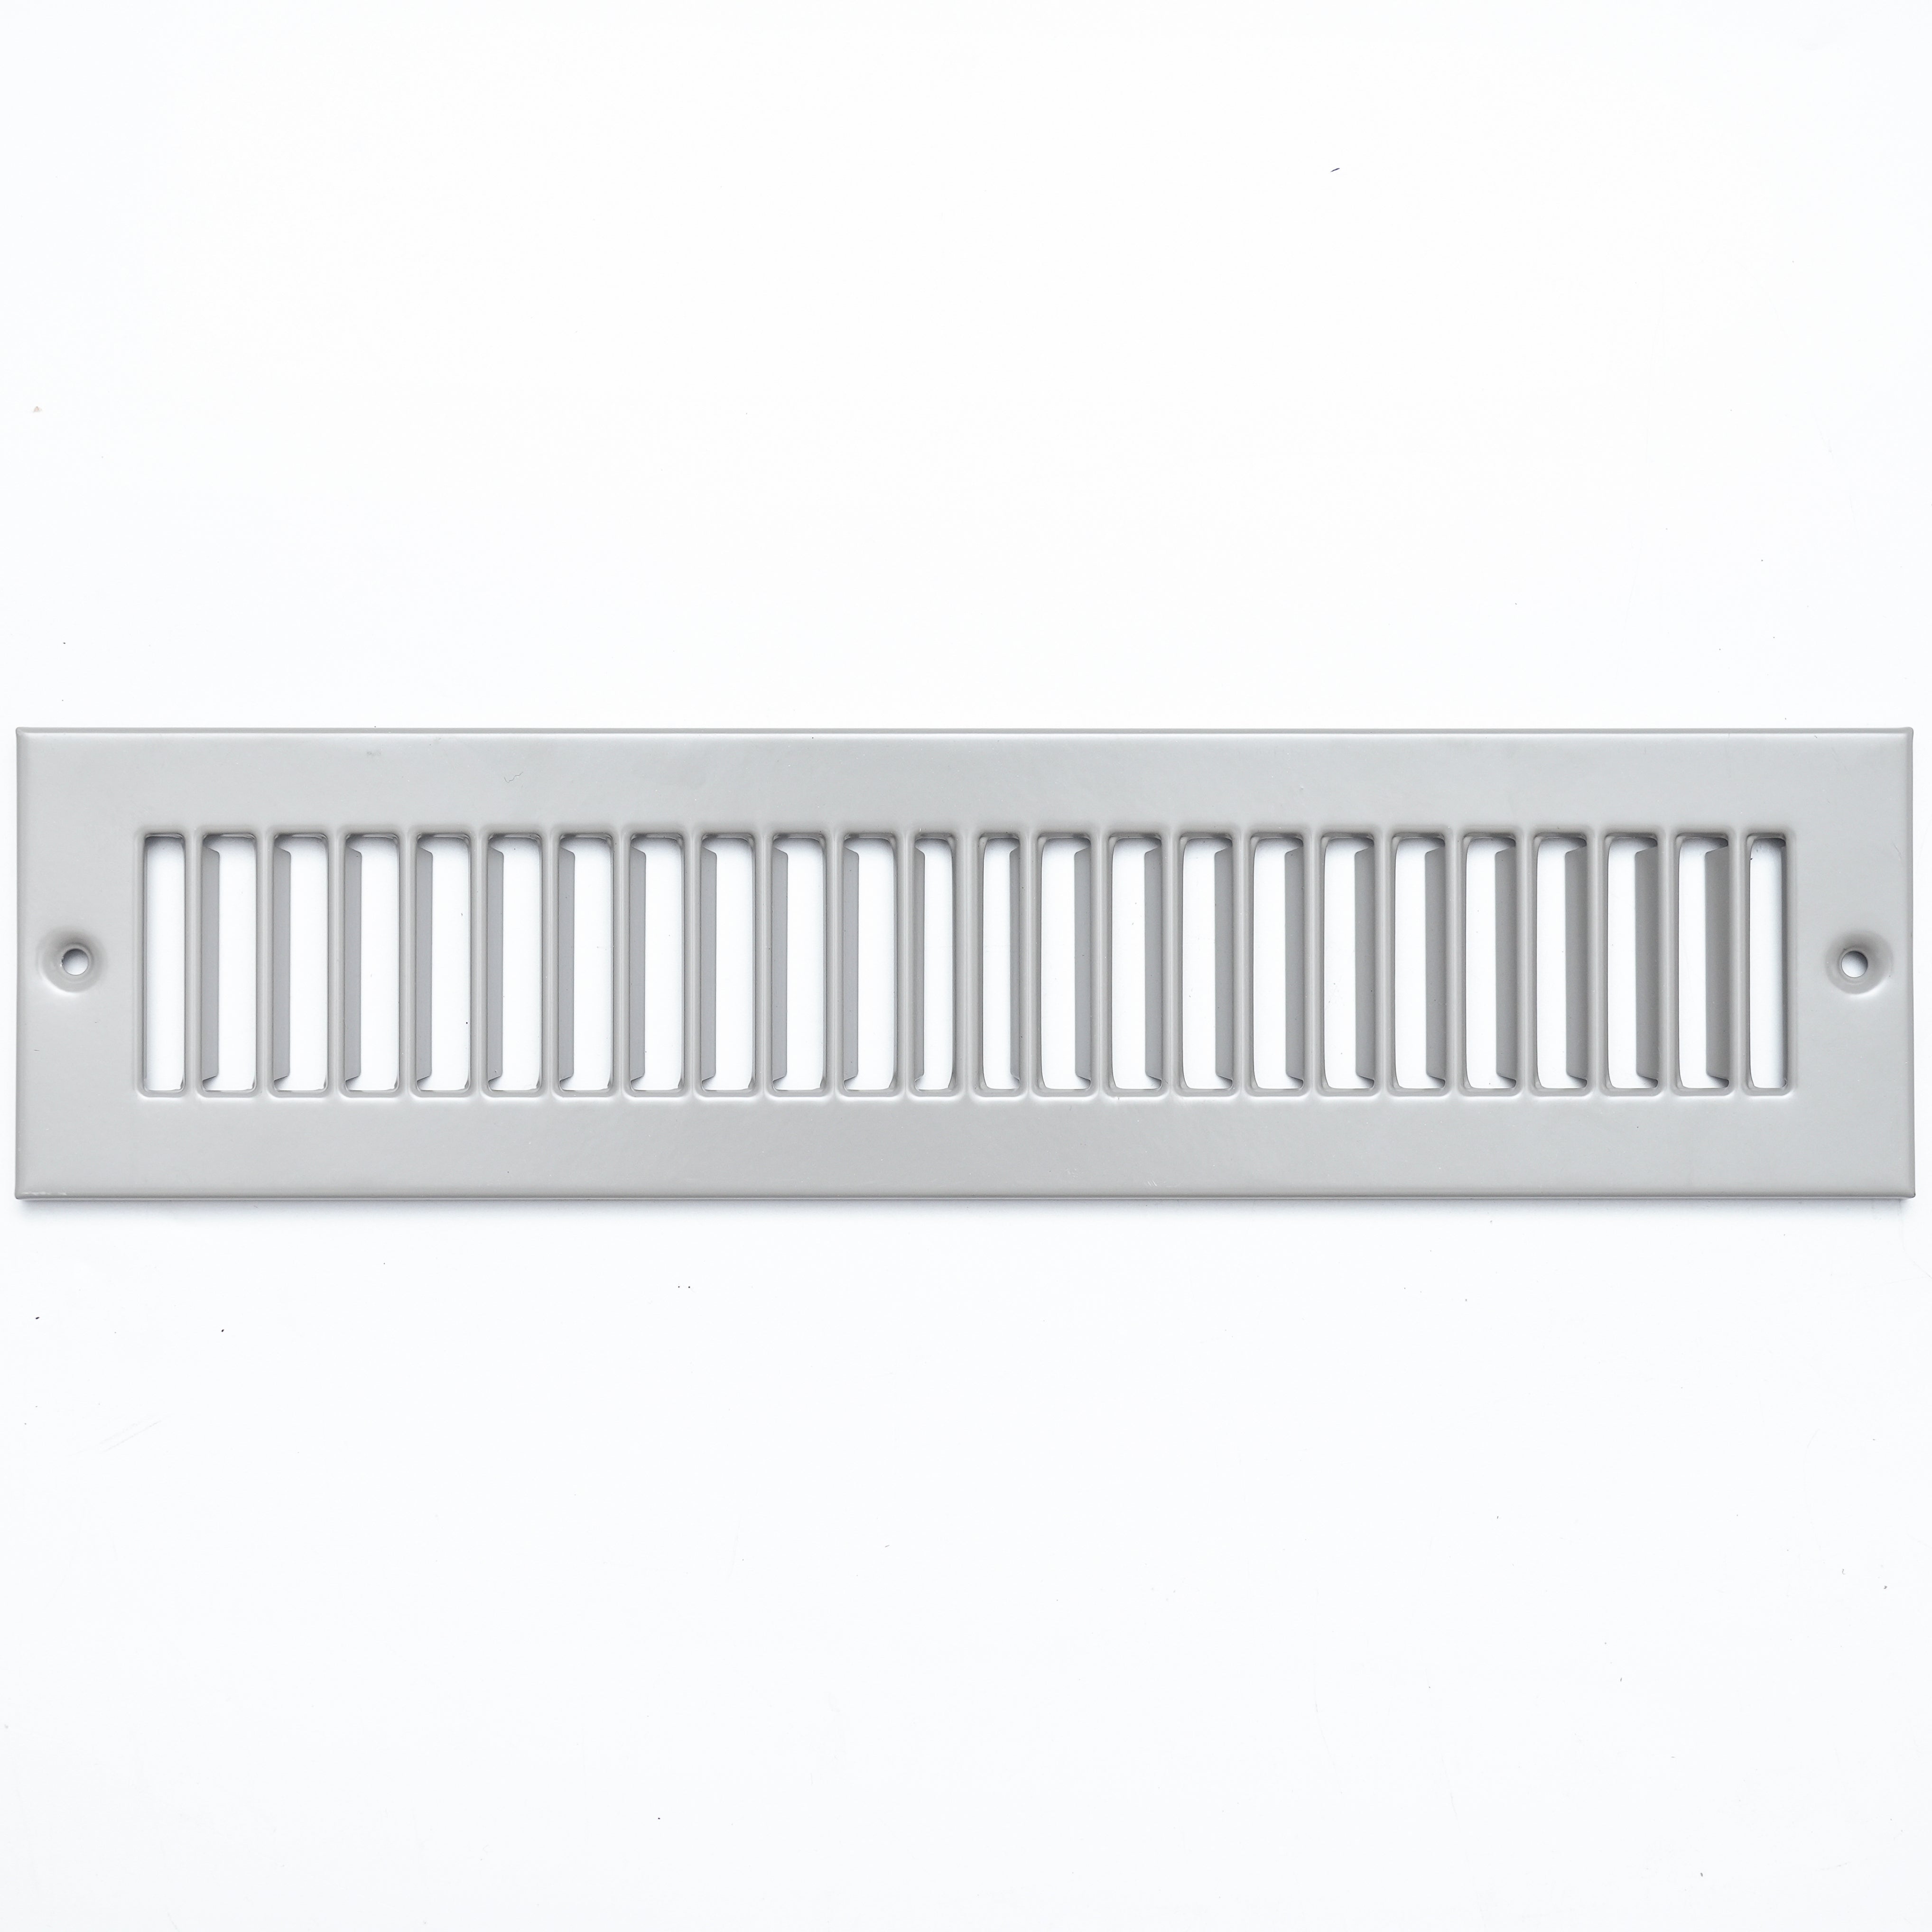 airgrilles 2" x 12" toe kick register grille   vent cover   outer dimensions: 3.5" x 13.5"   gray hnd-tgs-gr-2x12  - 1